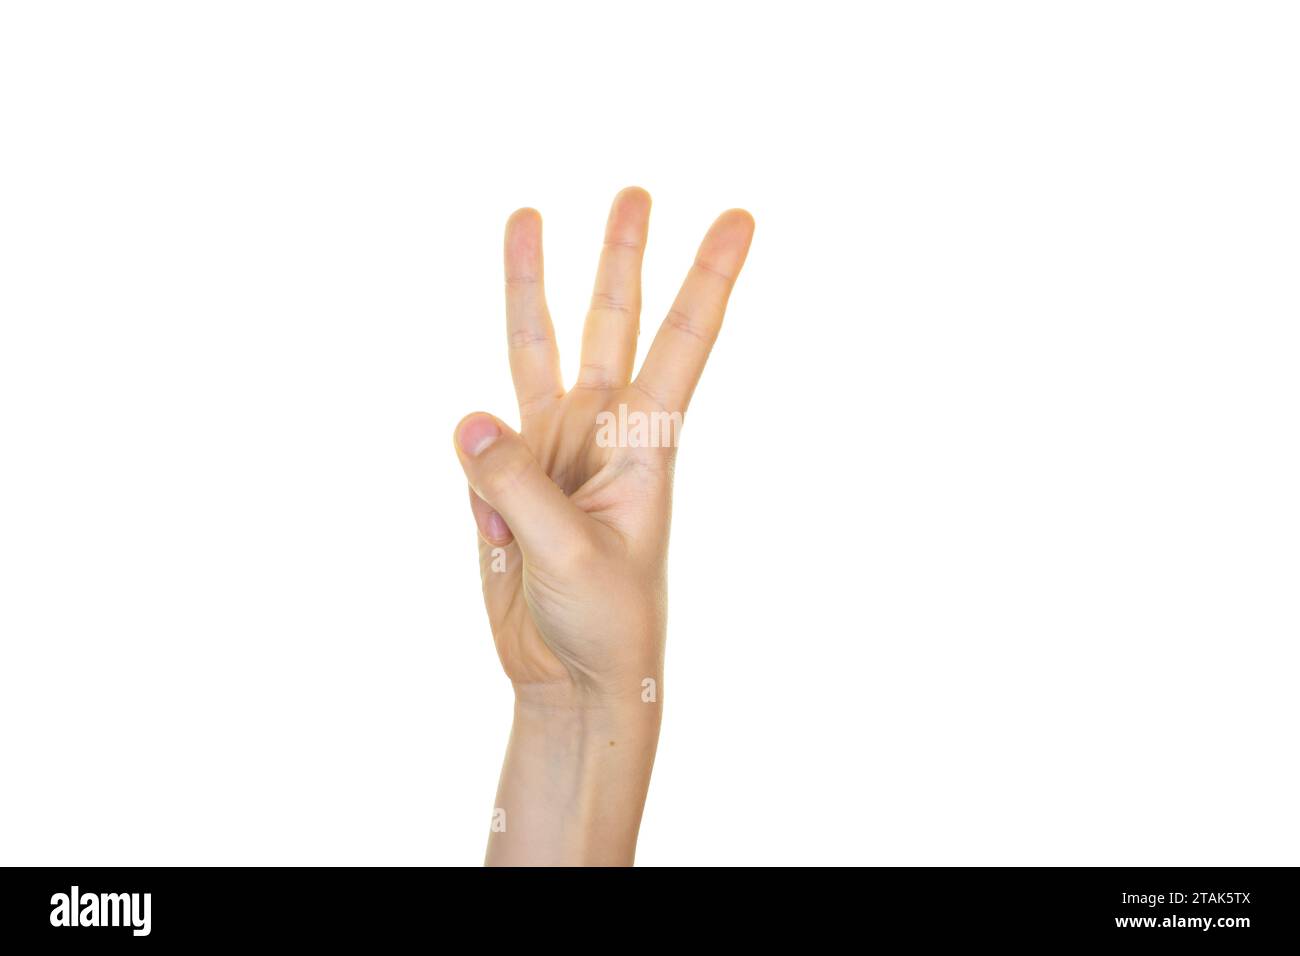 A hand showing numbers, isolated on a white background Stock Photo